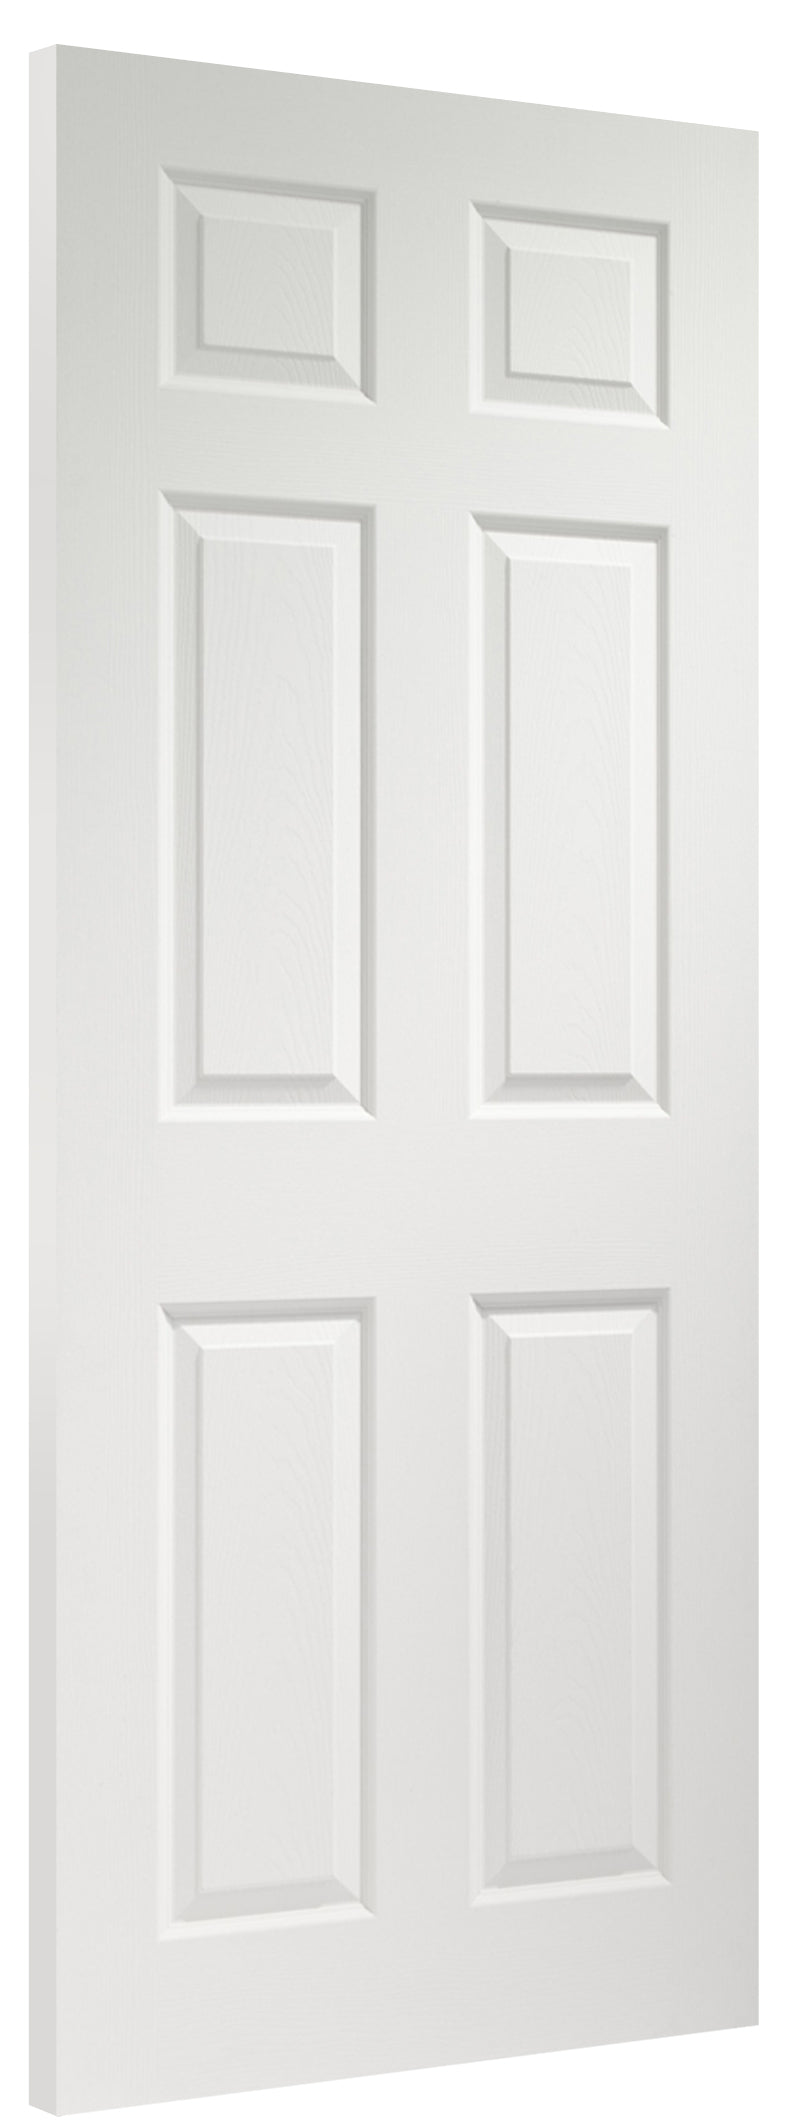 Internal White Moulded Colonist 6 Panel Fire Door